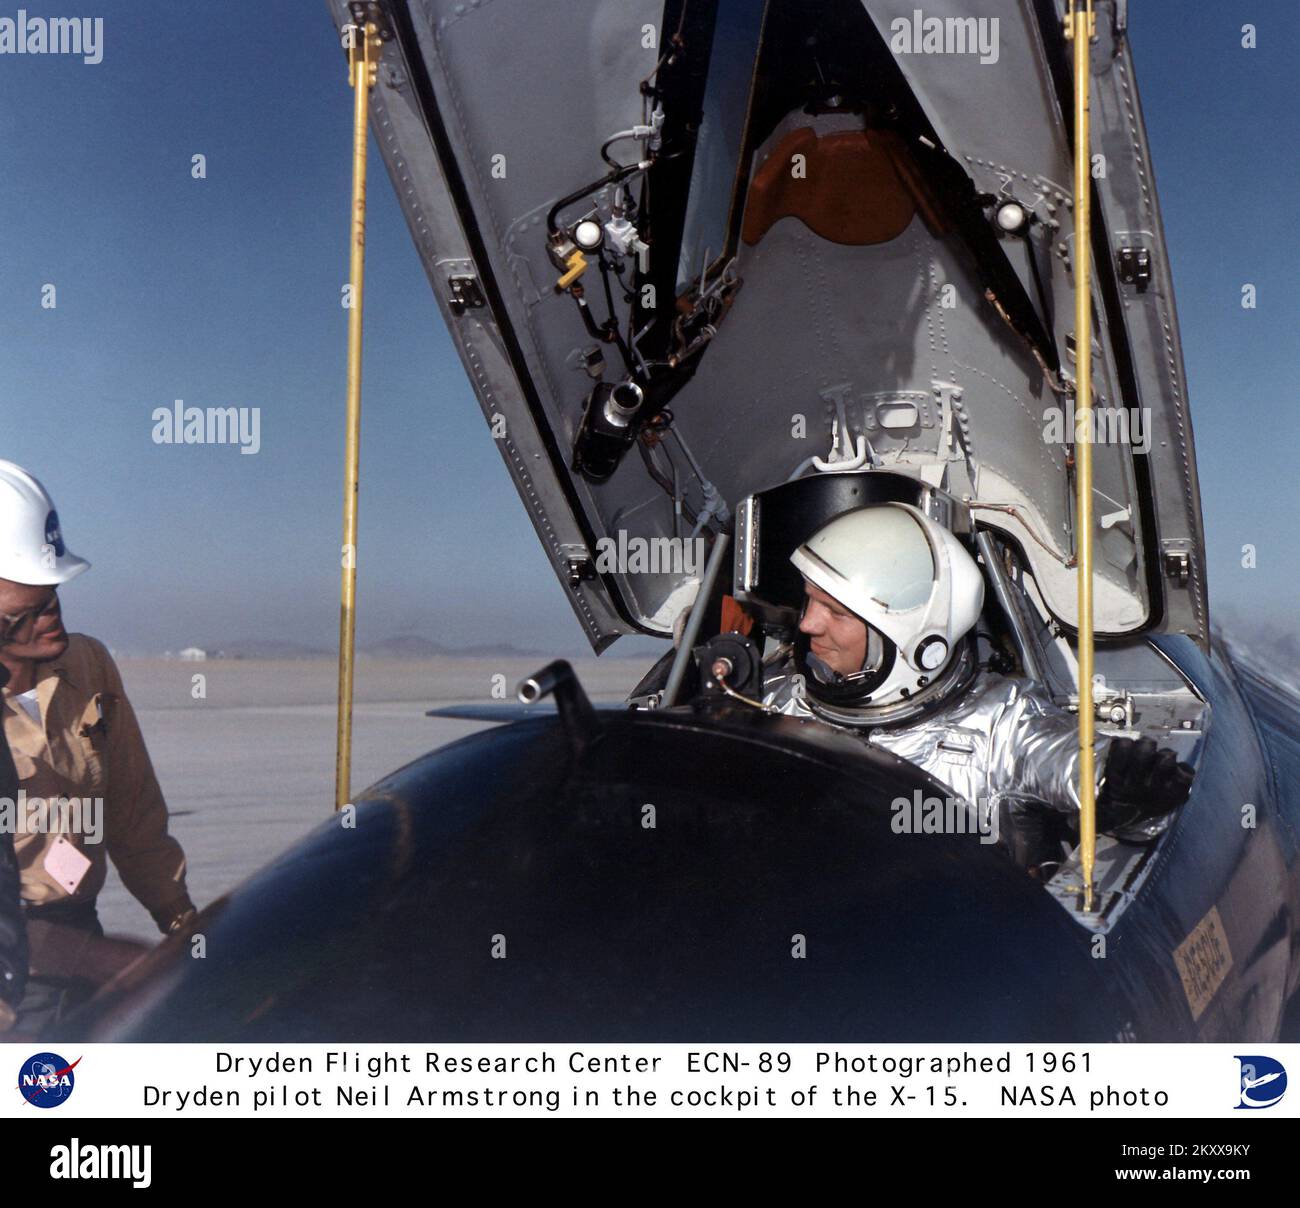 (1961) NASA pilot Neil Armstrong is seen here in the cockpit of the X-15 ship #1 (56-6670) after a research flight.   A U.S. Navy pilot in the Korean War who flew 78 combat missions in F9F-2 jet fighters and who was awarded the Air Medal and two Gold Stars, Armstrong graduated from Purdue University in 1955 with a bachelor degree in aeronautical engineering. That same year, he joined the National Advisory Committee for Aeronautics' Lewis Flight Propulsion Laboratory in Cleveland, Ohio (today, the NASA Glenn Research Center). Stock Photo